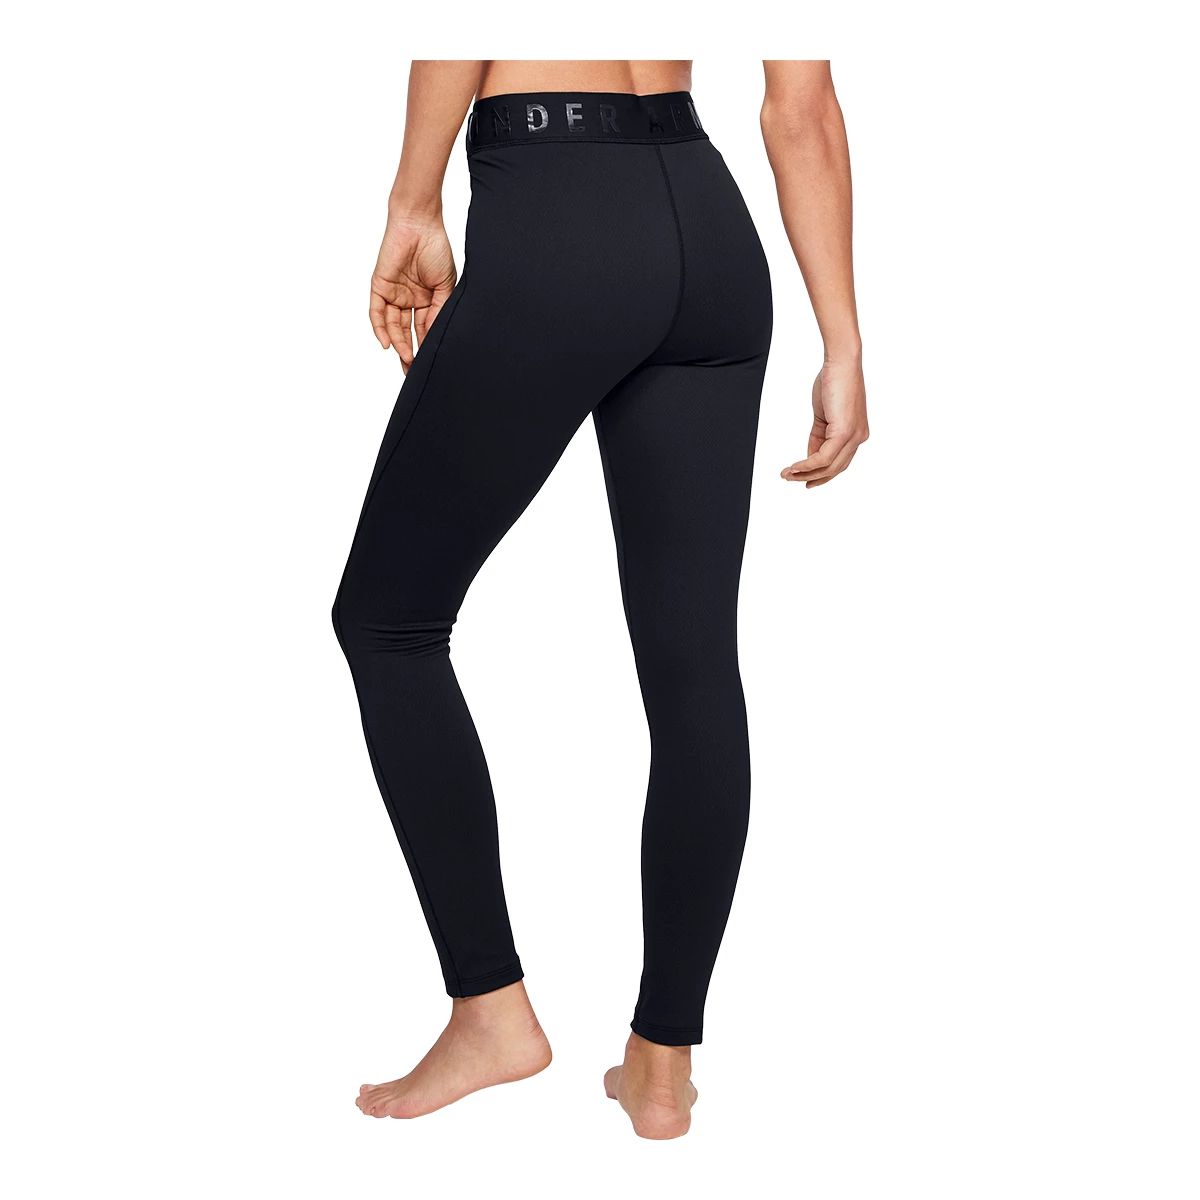 https://media-www.atmosphere.ca/product/div-03-softgoods/dpt-78-winter-clothing-accessories/sdpt-02-womens/332864196/ua-w-base-legging-3-0-f20-b-black-xs--694b3dbd-3274-4276-b399-0ba233e9c7b4-jpgrendition.jpg?imdensity=1&imwidth=1244&impolicy=mZoom